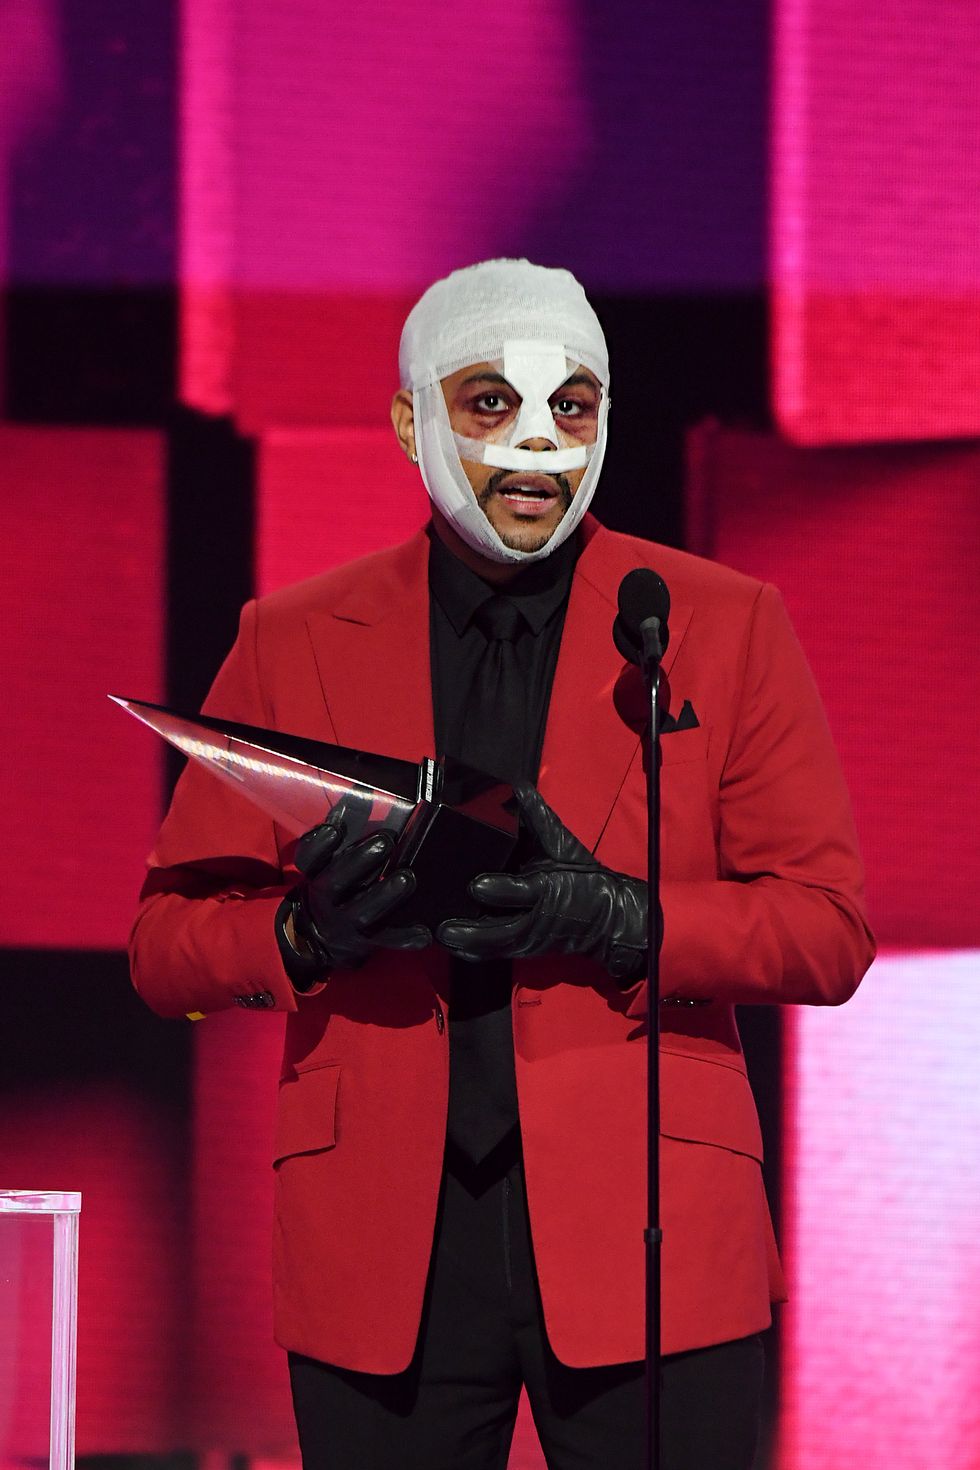 AMAs 2020: Here's Why The Weeknd's Face Was Completely Covered in Bandages